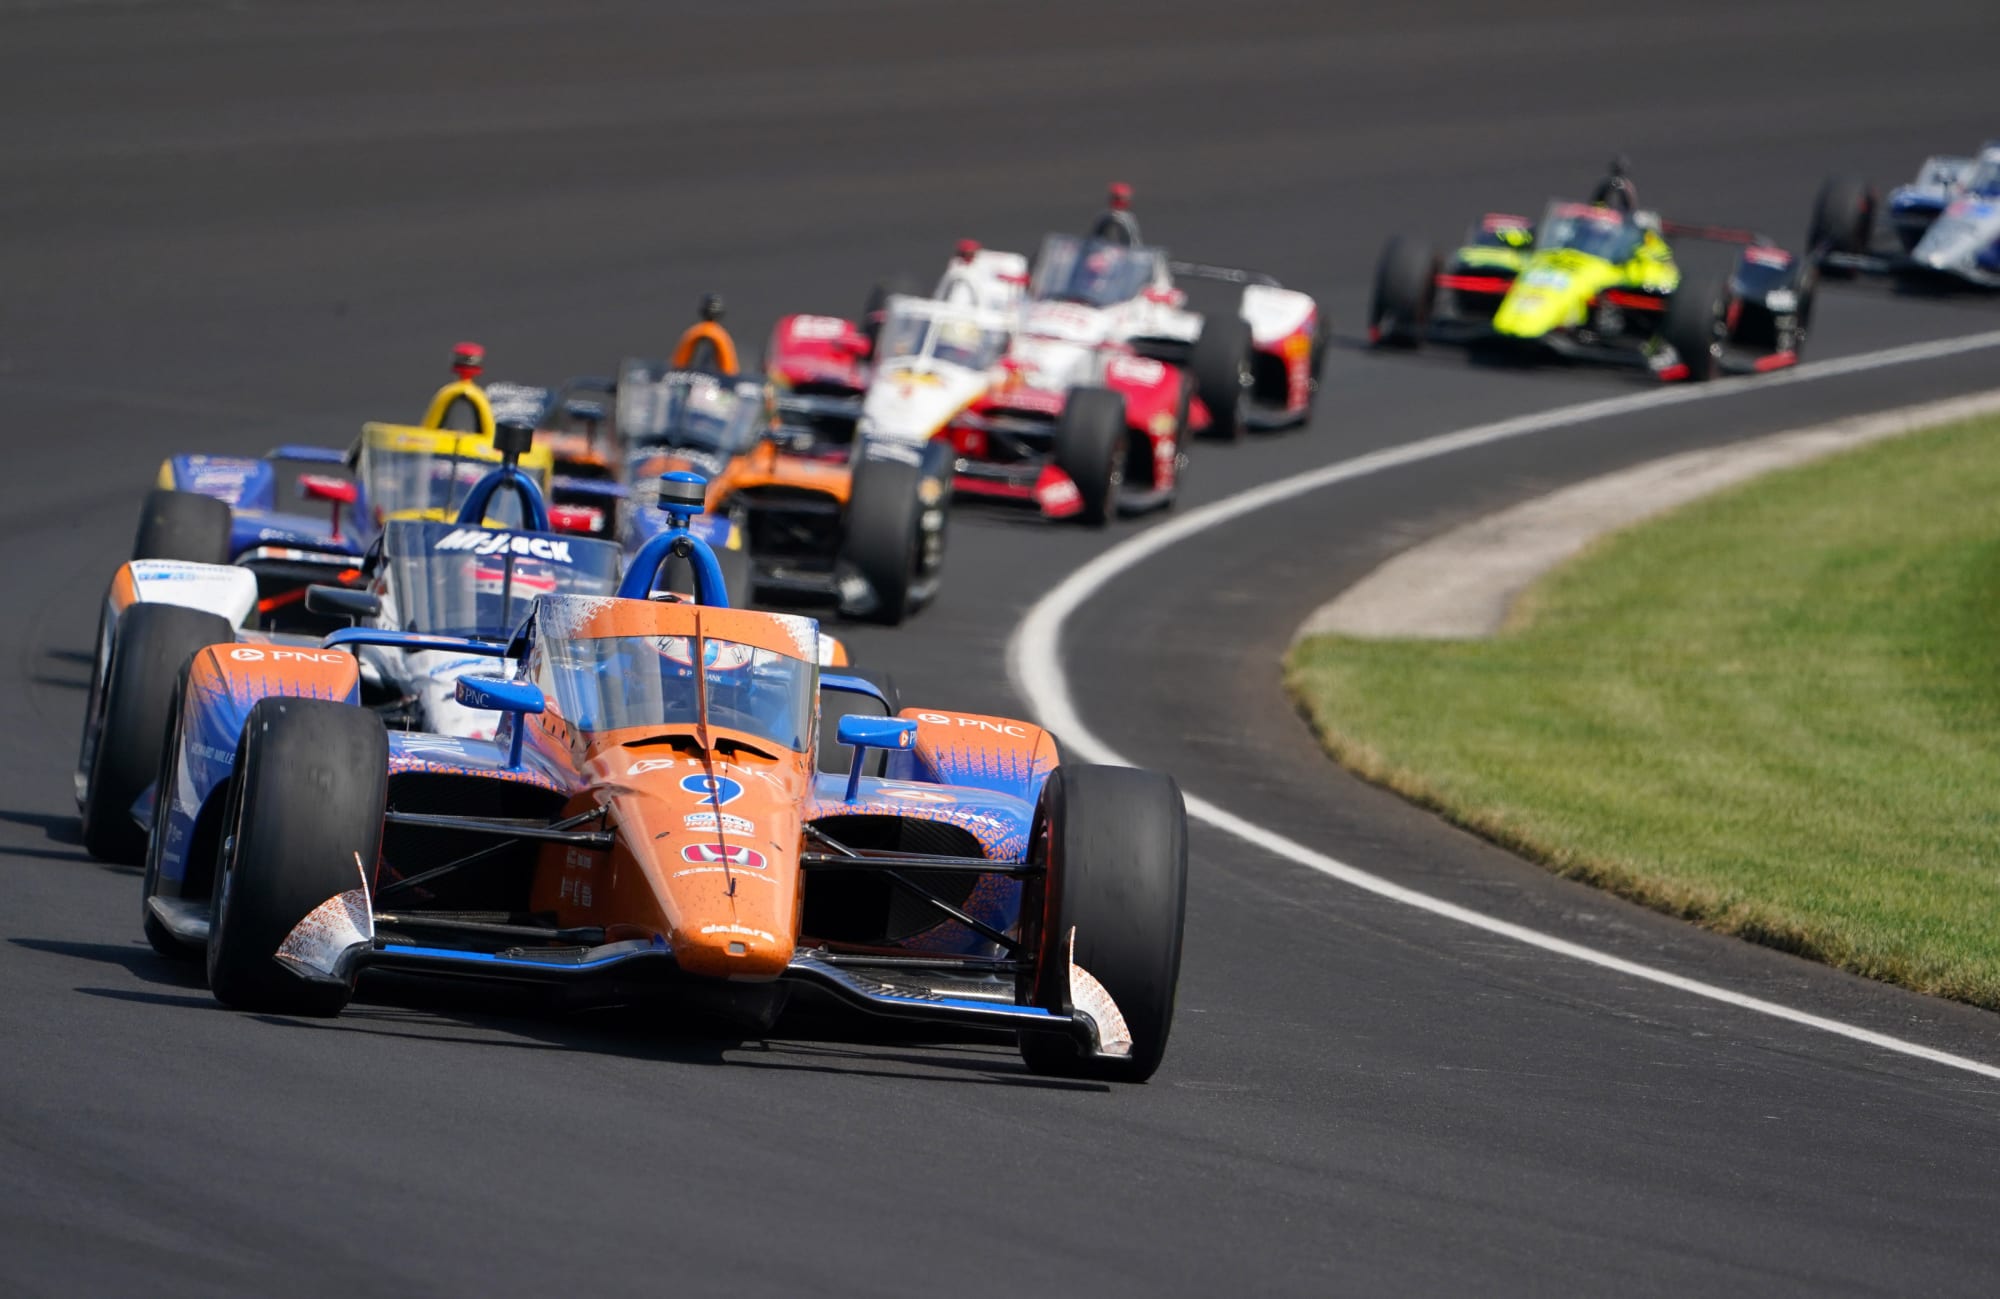 IndyCar 2021 Indy 500 entry list The remaining unknowns